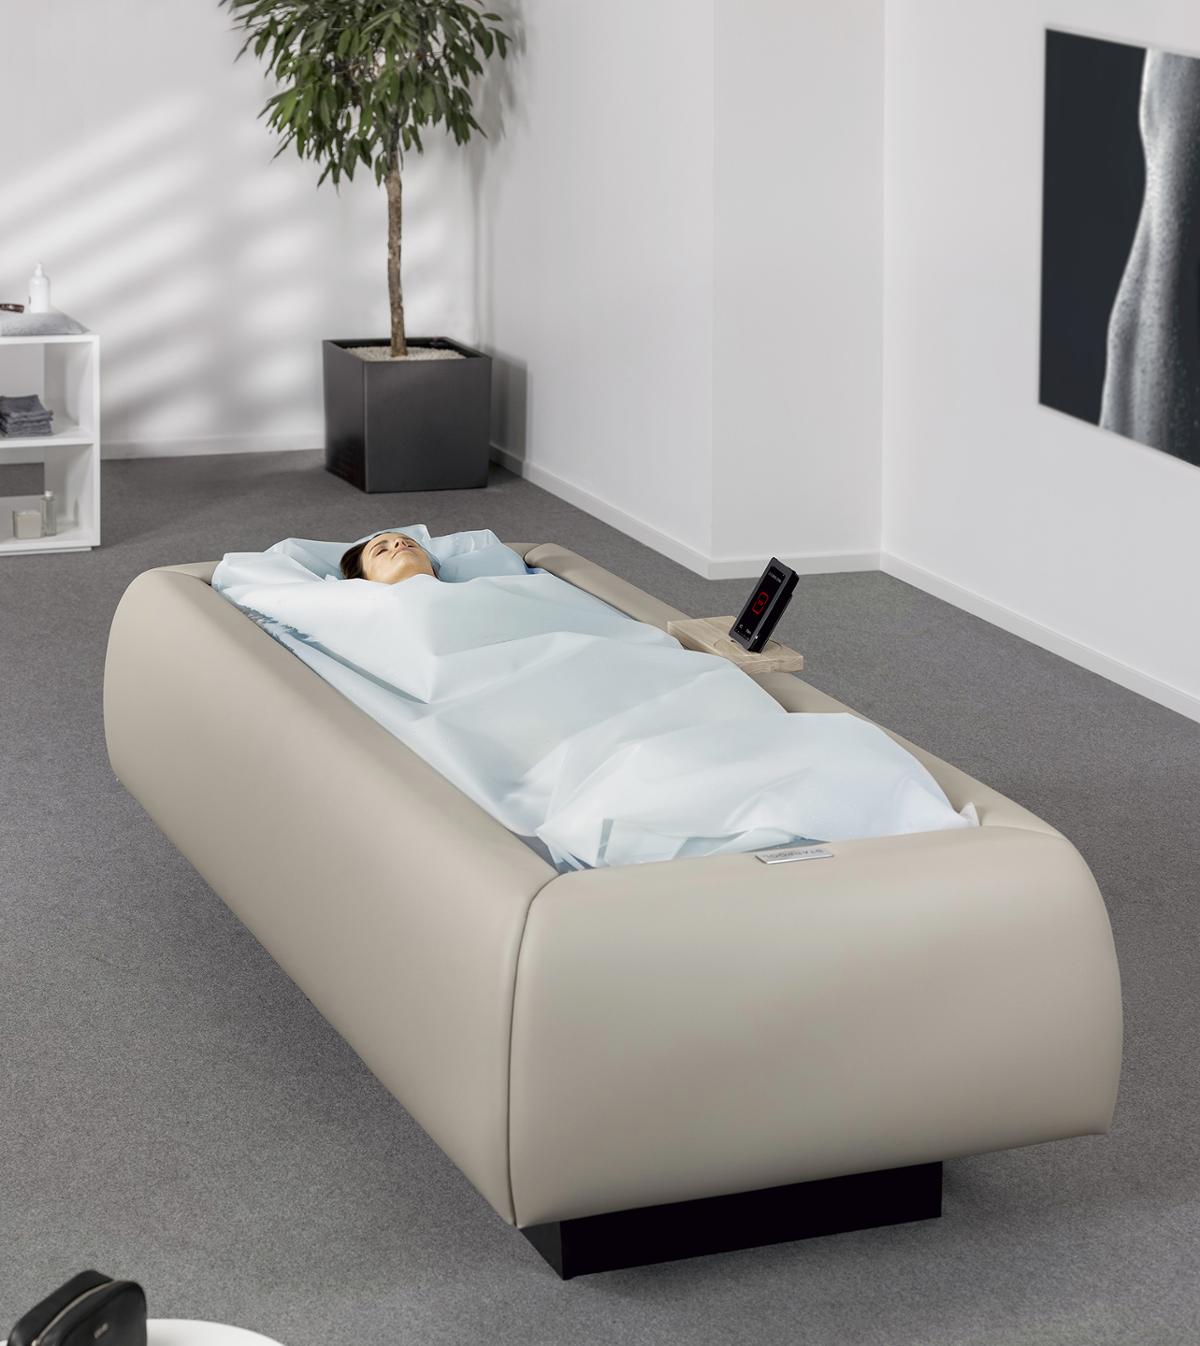 The bed combines dry flotation with cold therapy / Gaia Panozzo 